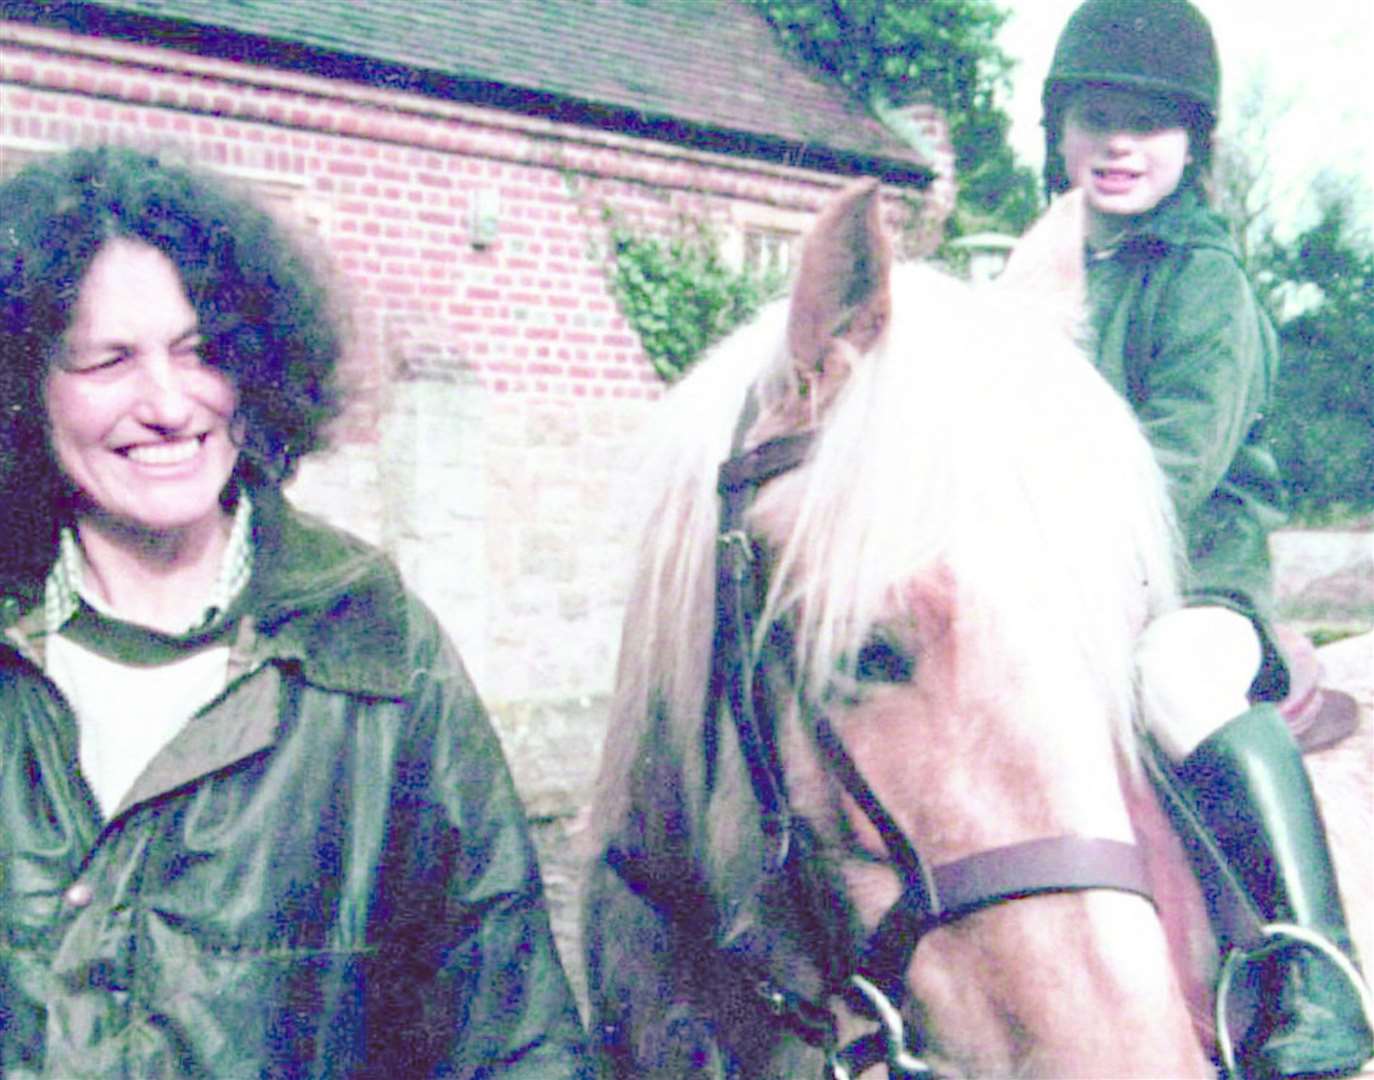 Lin and Megan Russell - both were killed in the attack in 1996